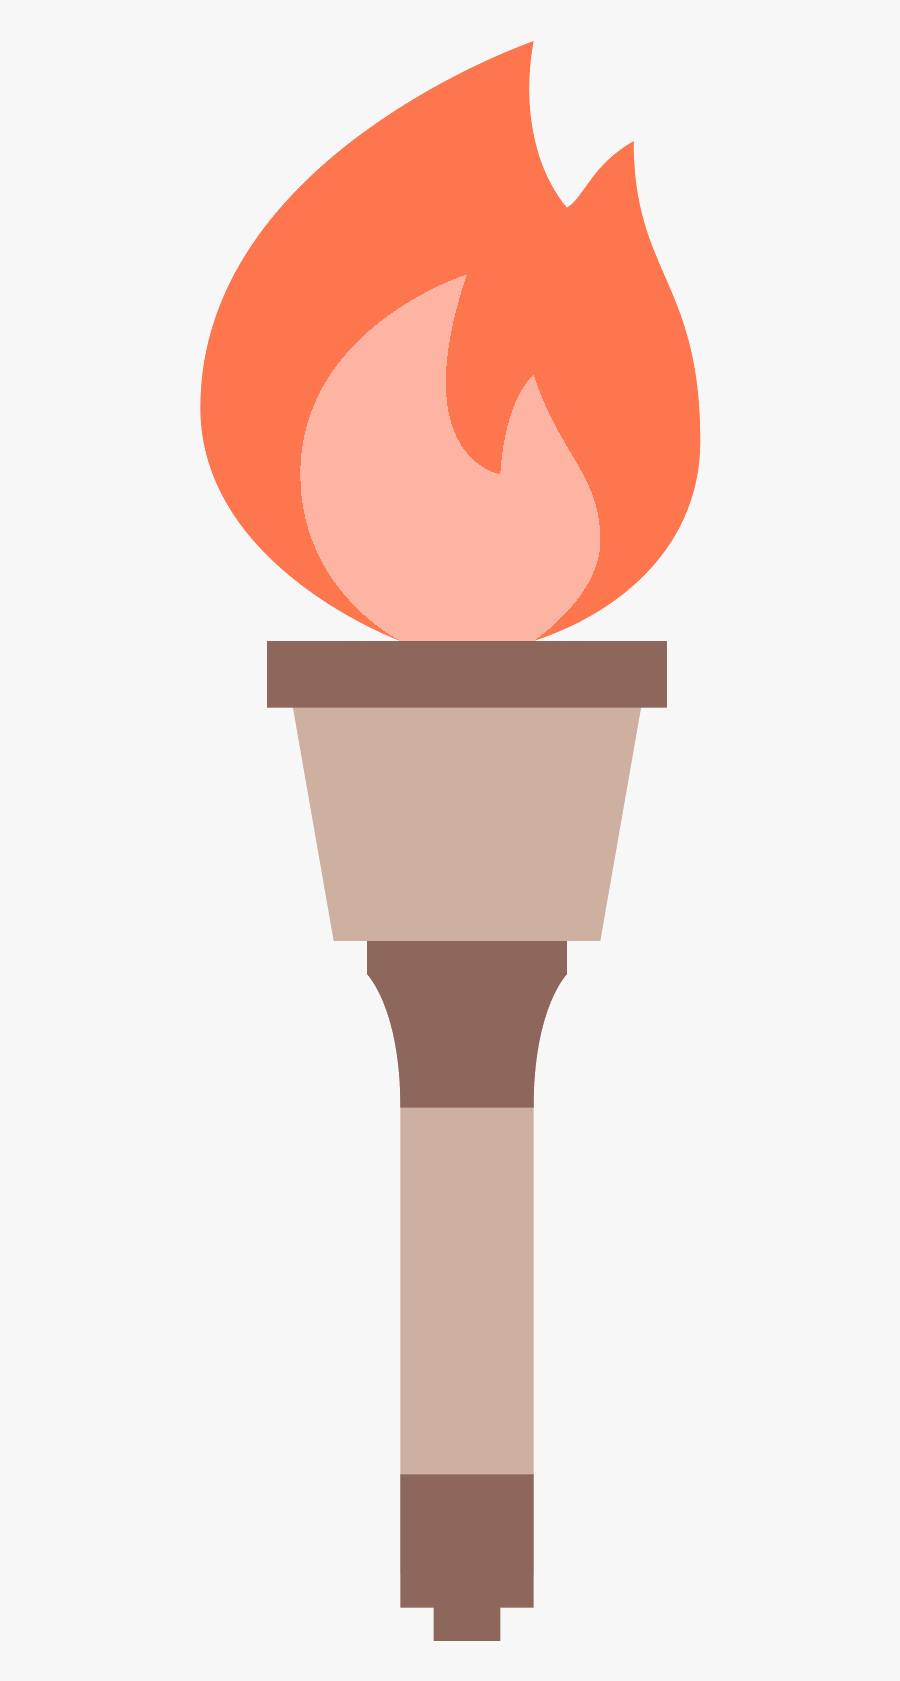 Torch Png Pic - Olympic Torch No Background, Transparent Clipart